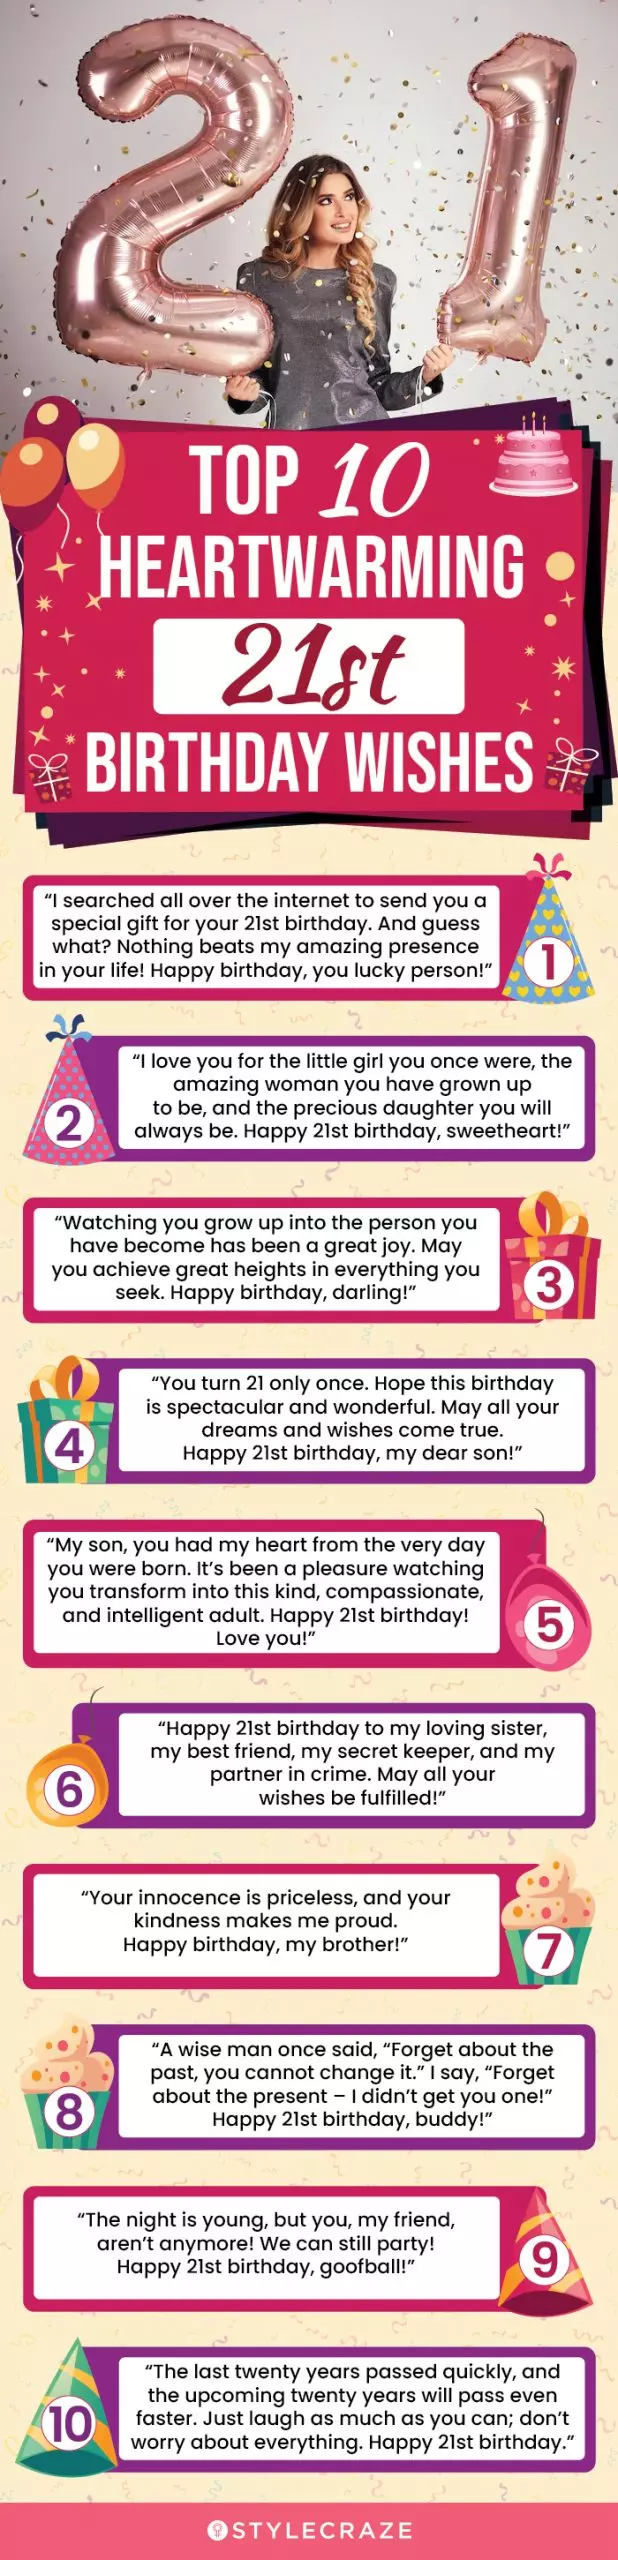 top 10 heartwarming 21st birthday wishes (infographic)